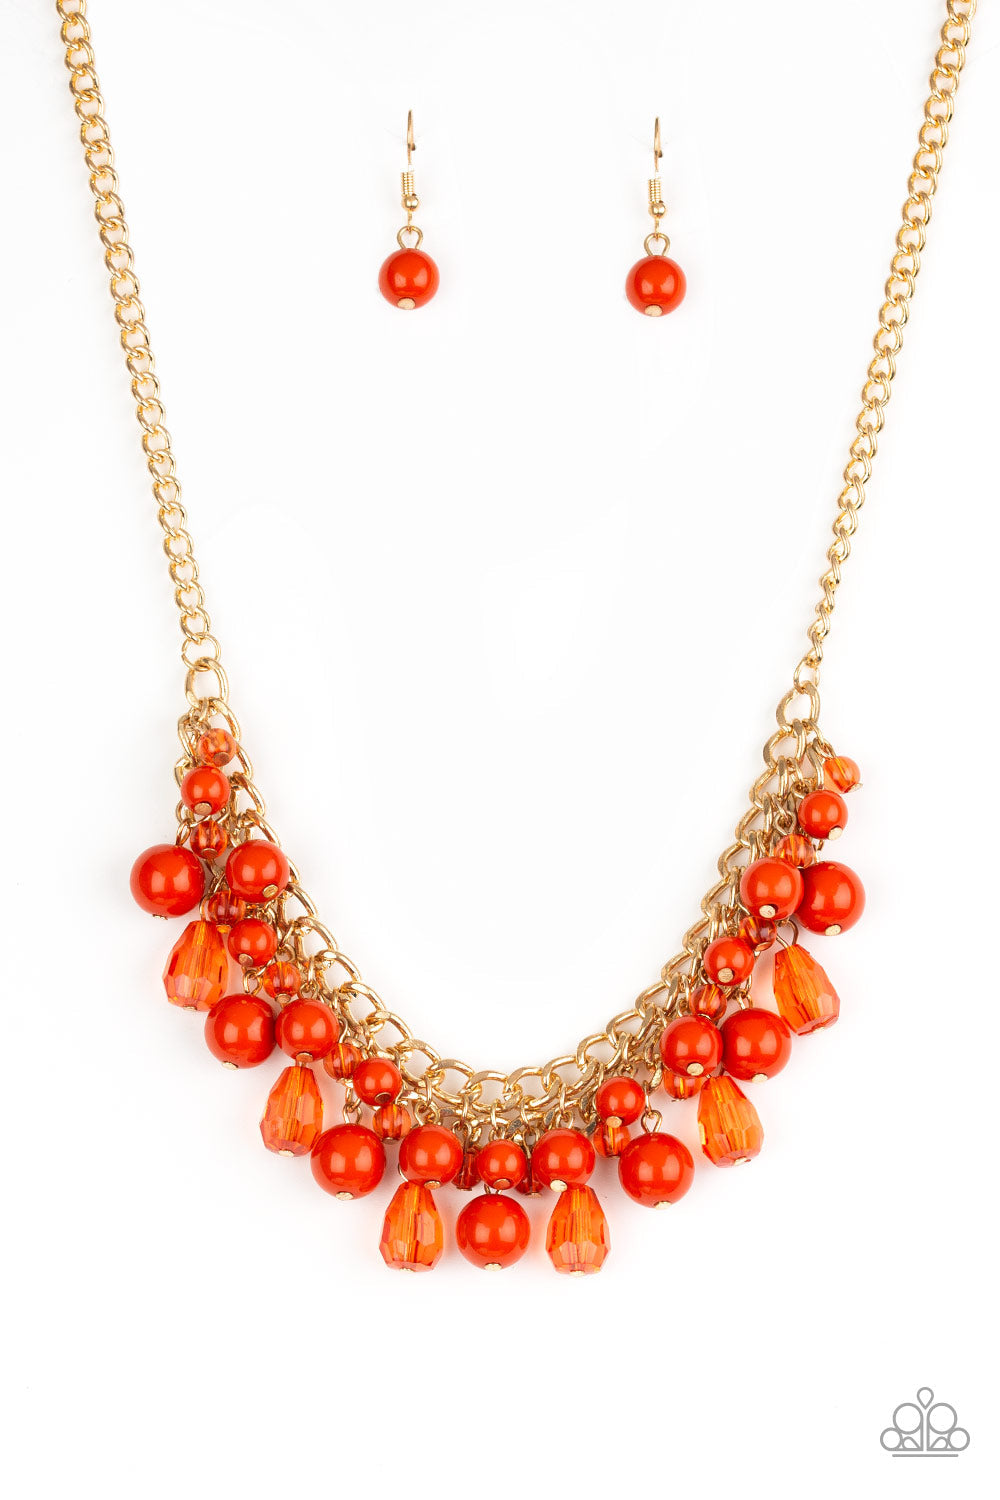 Tour de Trendsetter - Orange and Gold Necklace - Paparazzi Accessories - Varying in shape, glassy and polished orange beads swing from the bottom of interlocking gold chains. Crystal-like teardrops are sprinkled along the colorful beading, creating a flirtatious fringe below collar.